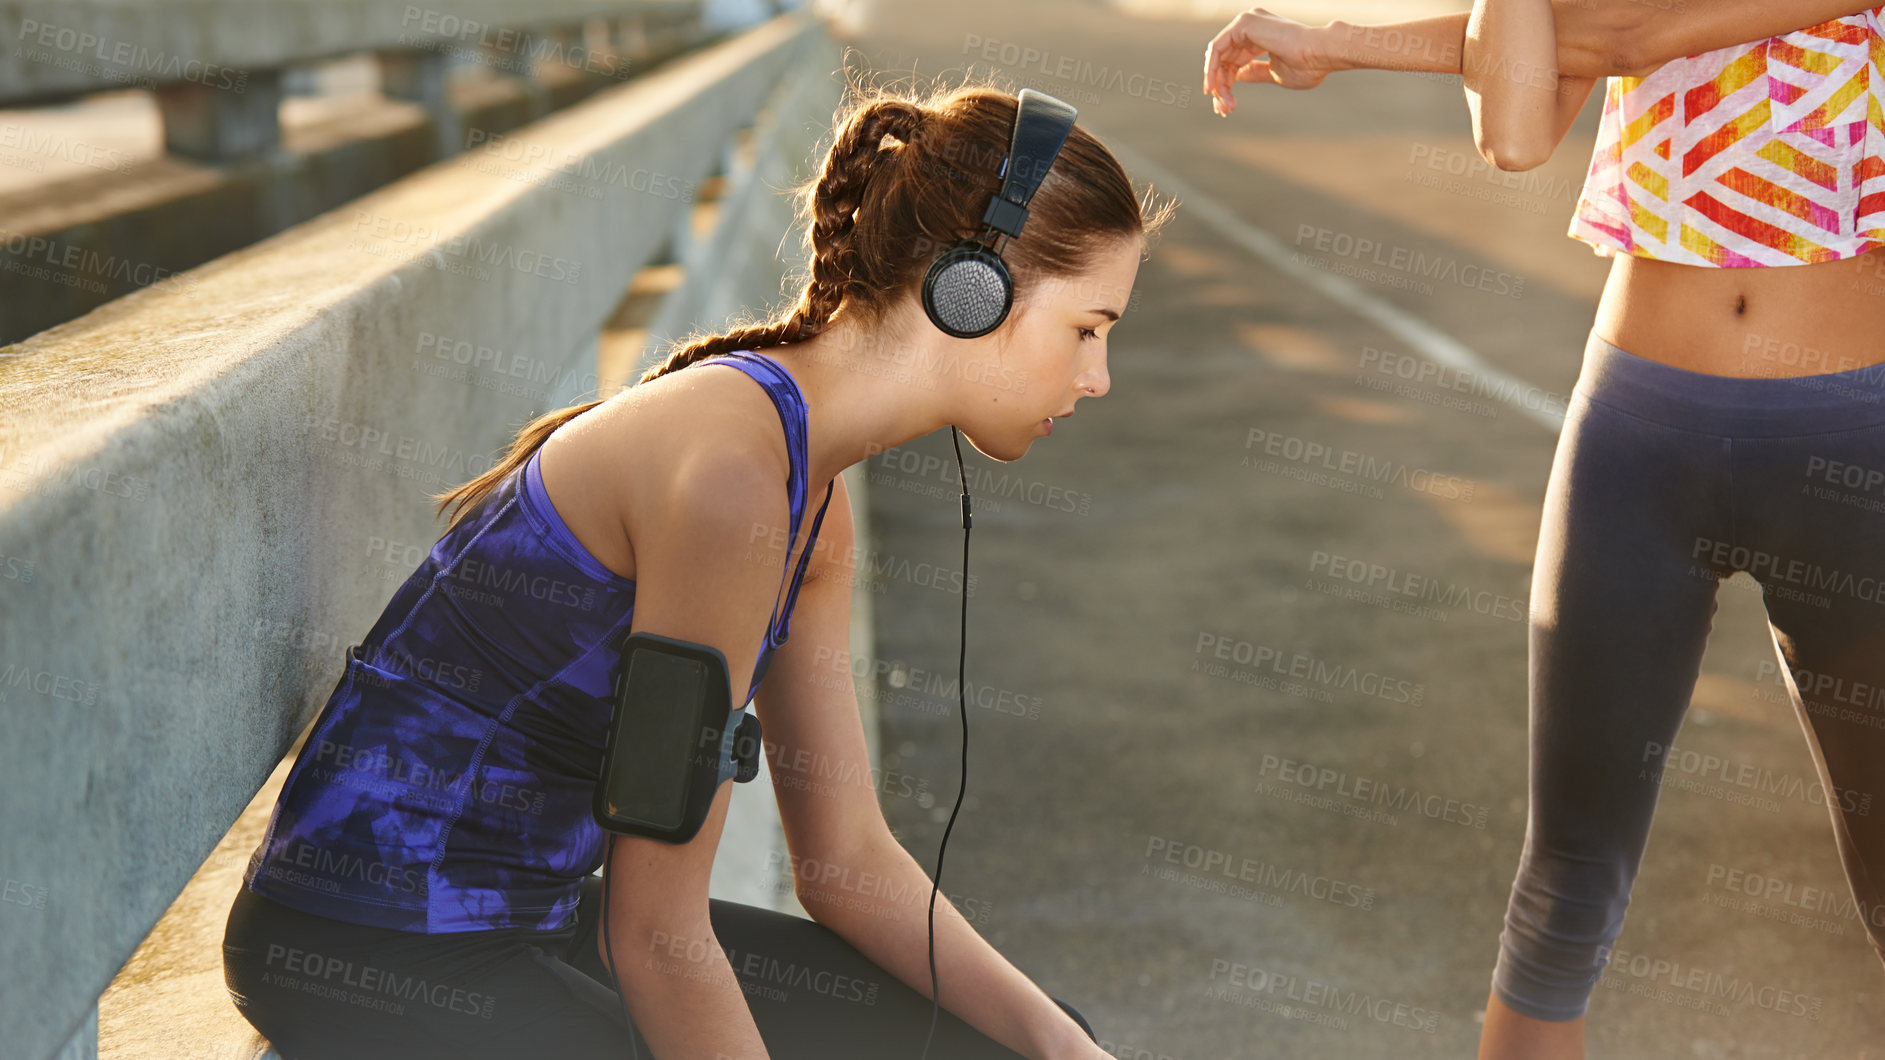 Buy stock photo Shot of a young female jogger listening to music before a run with a friend through the city